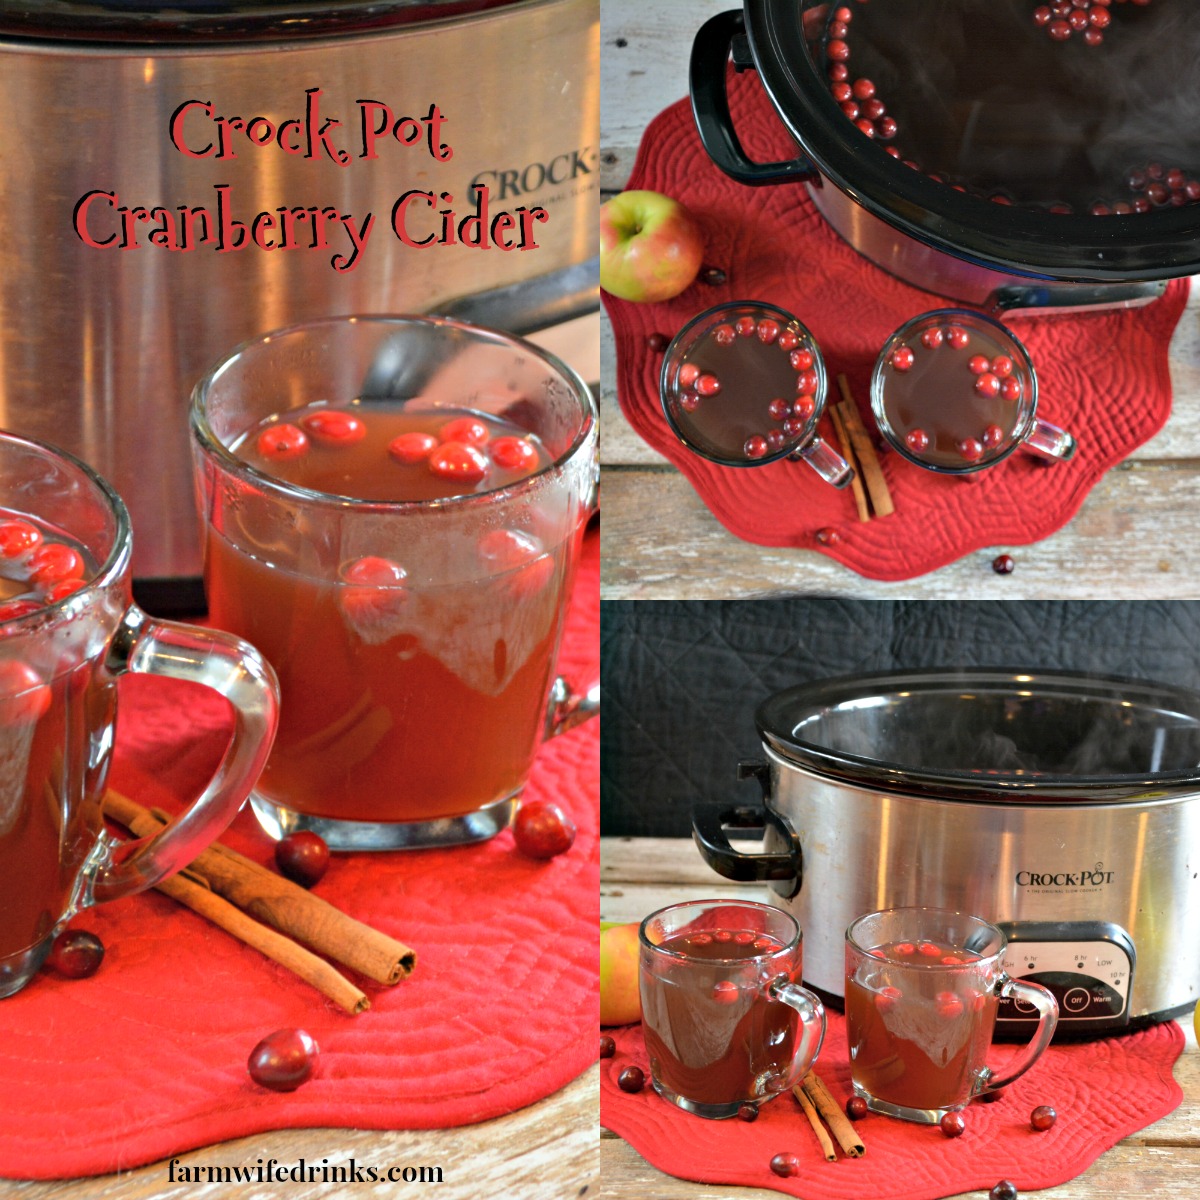 Crock Pot Cranberry Cider is a delicious spiced apple cider made in the slow cooker. This perfect fall or winter drink recipe can be made with a splash of rum or not for all to enjoy.